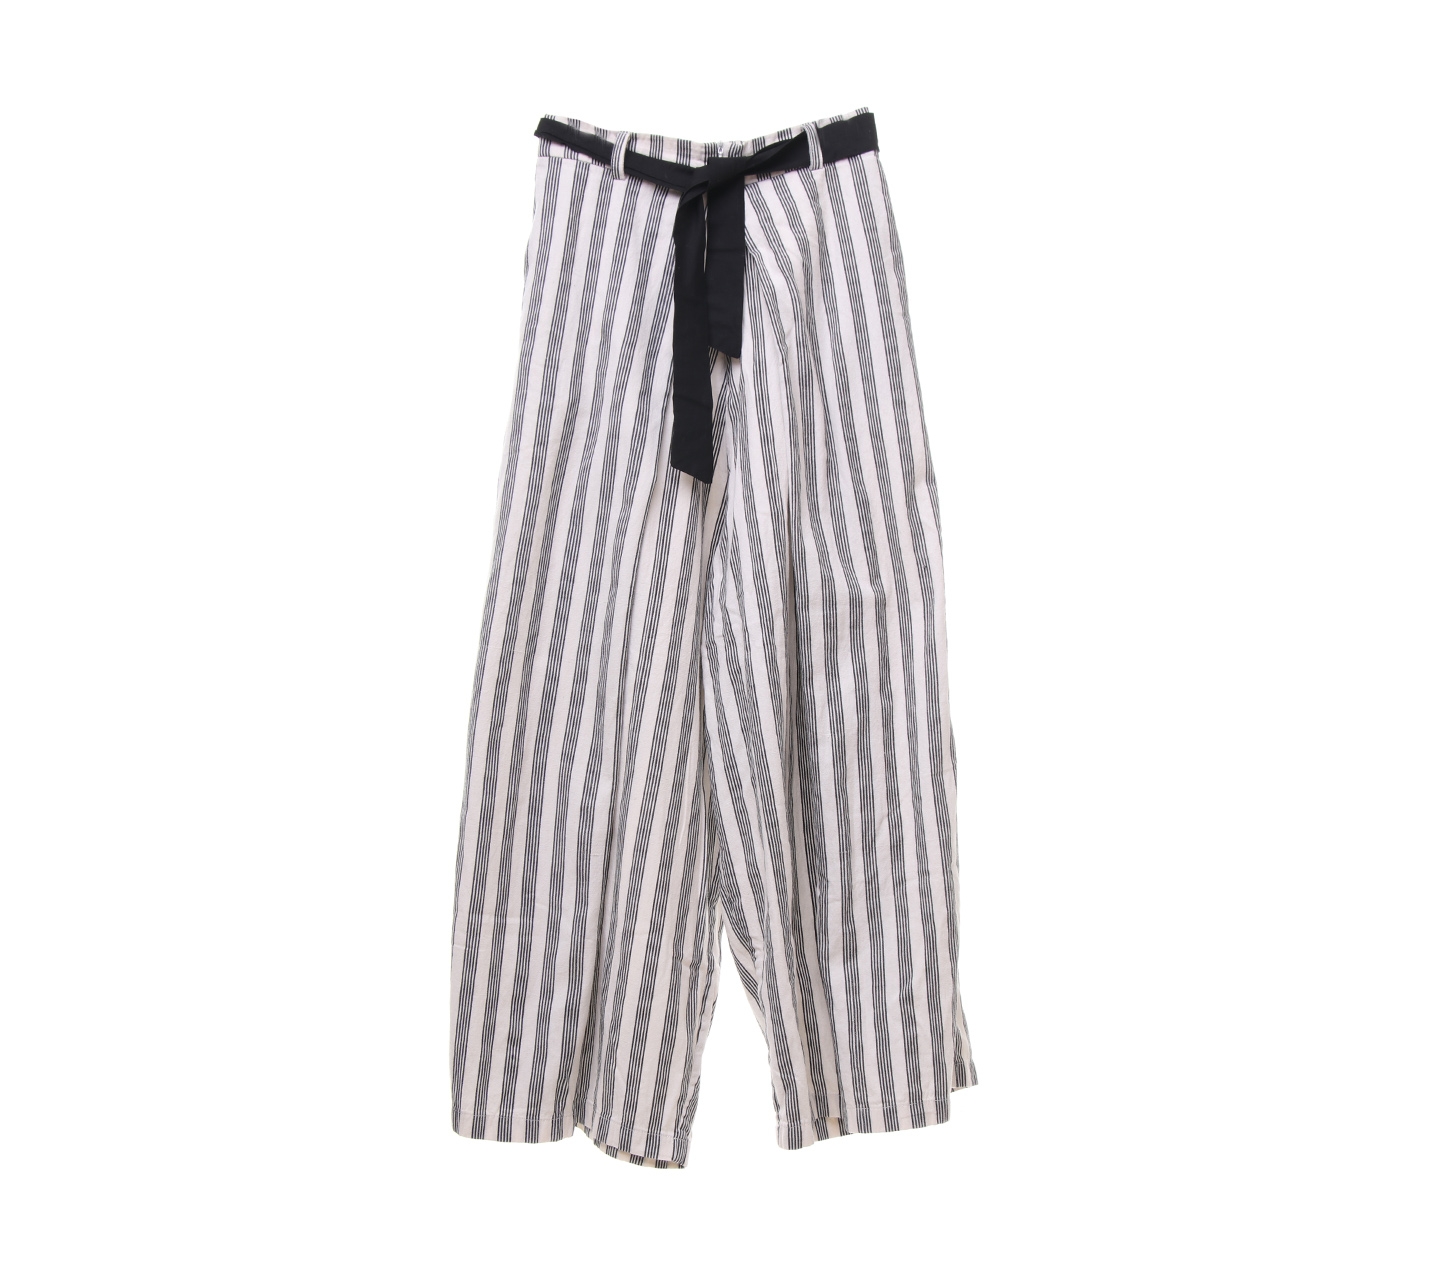 Douche Off White & Black Striped Culotes Cropped Pants